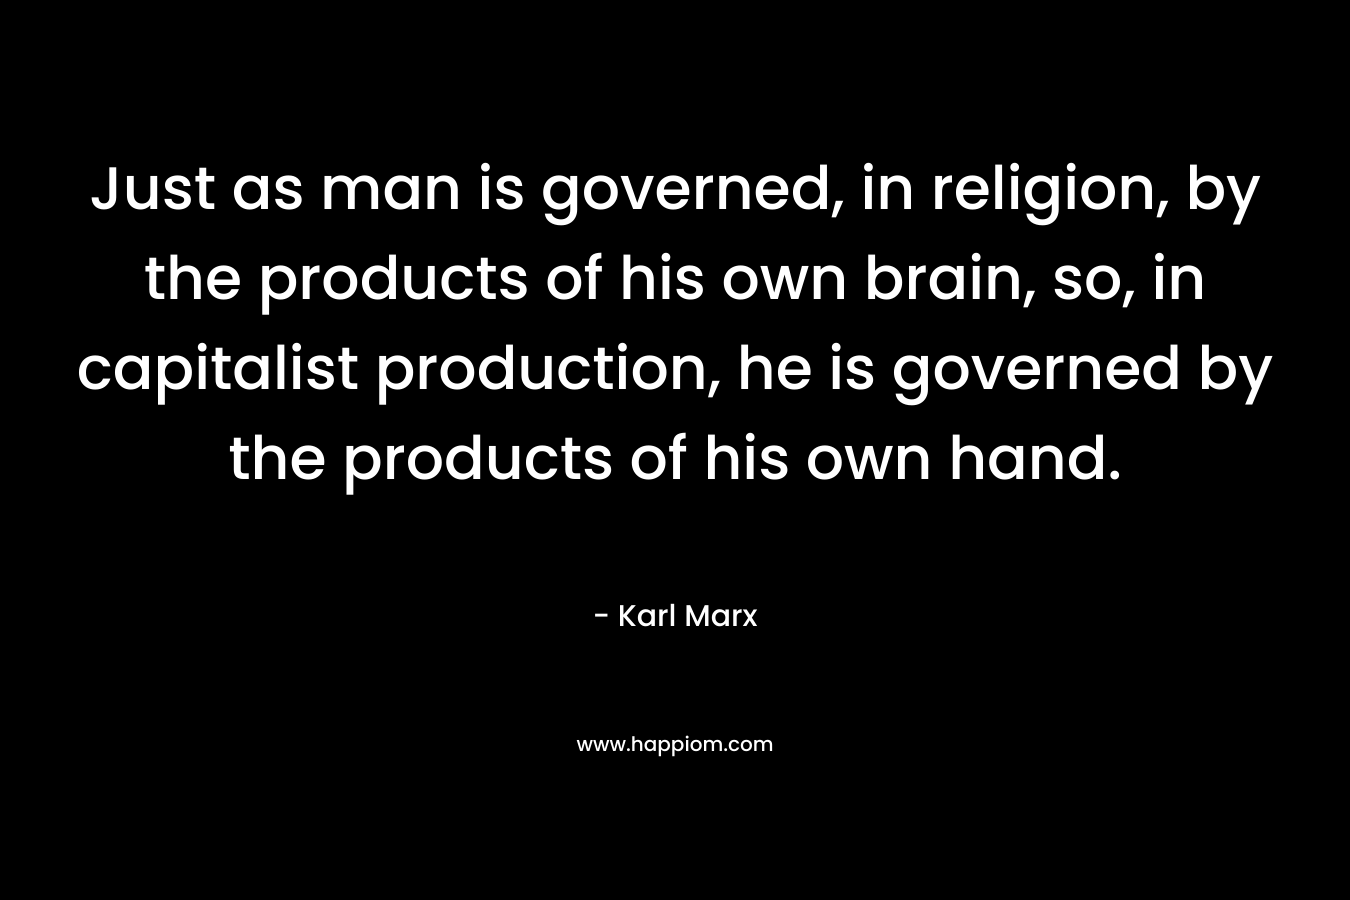 Just as man is governed, in religion, by the products of his own brain, so, in capitalist production, he is governed by the products of his own hand.